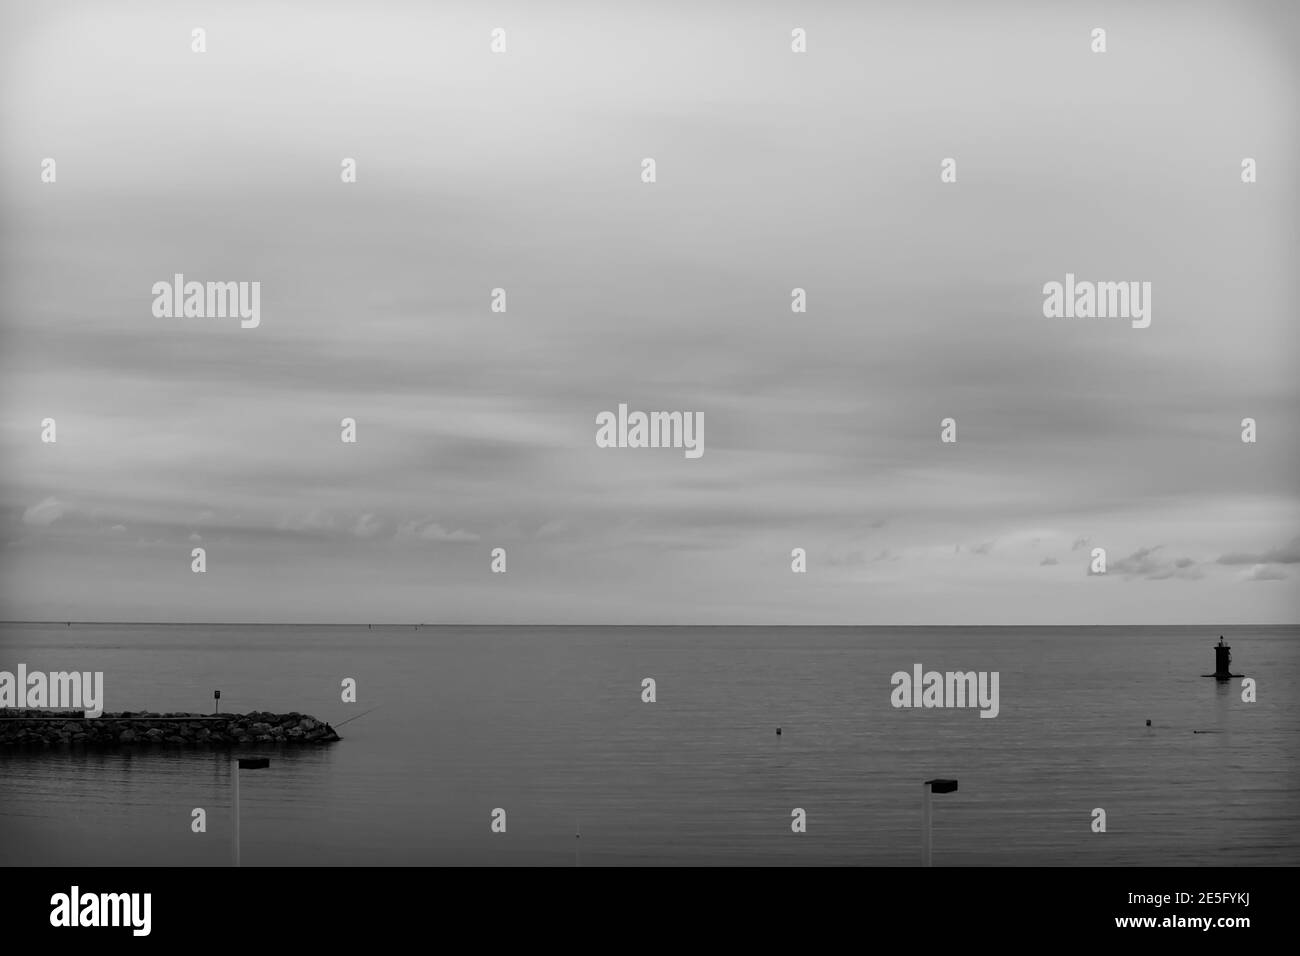 Minimalist landscape of the quiet beach of Gijón, Asturias, Spain.The photo is in black and white and aims to convey tranquility and calm. Stock Photo